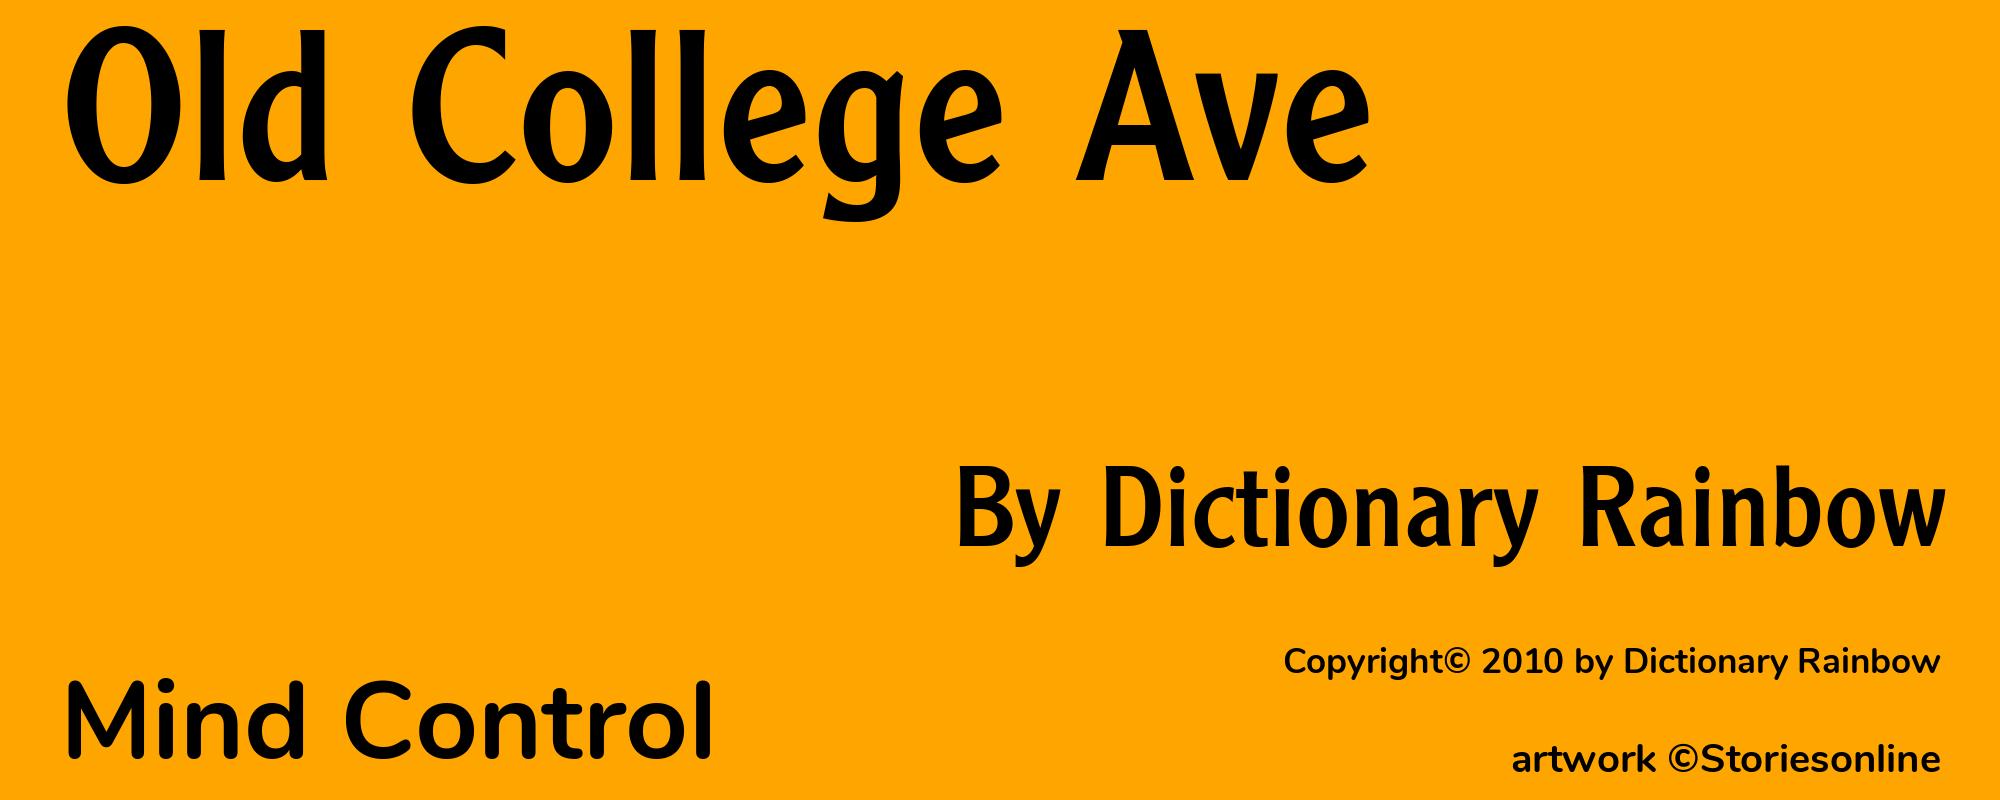 Old College Ave - Cover